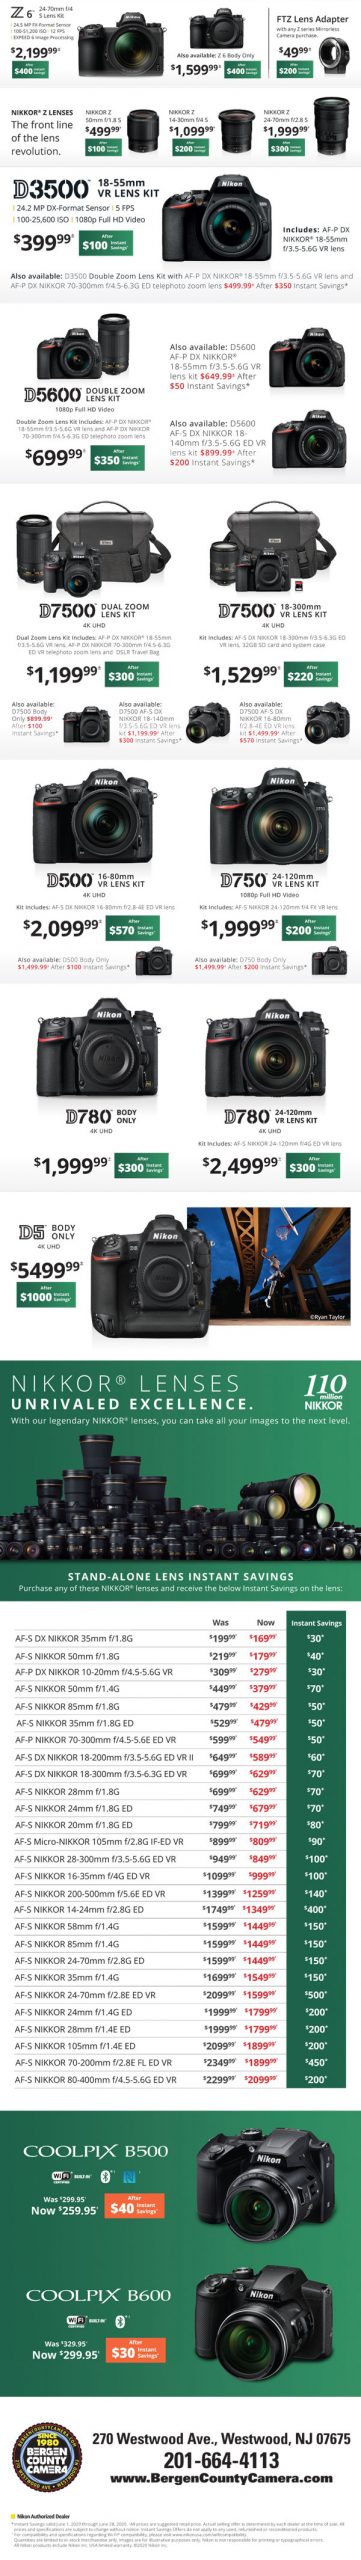 Z6 24-70mm f/4 S lens kit $2199.99 after $400 instant savings - Z 6 body only $1599.99 after $400 instant savings - FTZ lens adapter with any Z series mirrorless camera purchase $49.99 after $200 instant savings - Nikkor Z Lenses: The front line of the lens revolution. Nikkor Z 50mm f/1.8S $499.99 after $100 instant savings - Nikkor Z 14-30m f/4 S $1099.99 after $200 instant savings - Nikkor Z 24-70mm f/2.8 S $1999.99 after $300 instant savings - D3500 18-55mm VR Lens Kit $399.99 after $100 instant savings - D5600 double zoom lens kit $699.99 after $350 instant savings - D5600 AF-P DX Nikkor 18-55mm f/3.5-5.6G VR lens kit $649.99 after $50 instant savings - D5600 AF-S DX Nikkor 18-140mm f/3.5-5.6G ED VR lens kit $899.99 after $200 instant savings - D7500 dual zoom lens kit $1199.99 after $300 instant savings - D7500 18-300mm VR lens kit $1529.99 after $220 instant savings - D7500 body only $899.99 after $100 instant savings - D7500 AF-S DC NIkkor 18-140mm f/3.5-5.6G ED lens kit $1199.99 after $300 instant savings - D7500 AF-S DX Nikkor 16-80mm f/2.8-4E ED VR lens kit $1499.99 after $570 instant savings - D500 16-80mm VR lens kit $2099.99 after $570 instant savings - D750 24-120mm VR lens kit $1999.99 after $200 instant savings - D780 body only $1999.99 after $300 instant savings - D780 24-120mm VR lens kit $2499.99 after $300 instant savings - D5 body only $5499.99 after $1000 instant savings - AF-S DX Nikkor 35mm f/1.8G was $199.99 now $169.99 instant savings $30 - AF-S Nikkor 50mm f/1.8G was $219.99 now $179.99 instant savings $40 - AF-P DX Nikkor 10-20mm f/4.5-5.6G VR was $309.99 now $279.99 instant savings $30 - AF-S Nikkor 50mm f/1.4G was $449.99 now $379.99 instant savings $70 - AF-S Nikkor 85mm f/1.8G was $479.99 now $429.99 instant savings $50 - AF-S Nikkor 35mm f/1.8G ED was $529.99 now $479.99 instant savings $50 - AF-P Nikkor 70-300mm f/4.5-5.6E ED VR was $599.99 now $549.99 instant savings $50 - AF-S DX Nikkor 18-200mm f/3.5-5.6G ED VR II was $649.99 now $589.99 instant savings $60 - AF-S DX Nikkor 18-300mm f/3.5-6.3G ED VR was $699.99 now $629.99 instant savings $70 - AF-S Nikkor 28mm f/1.8G was $699.99 now $629.99 instant savings $70 - AF-S Nikkor 24mm f/1.8G ED was $749.99 now $679.99 instant savings $70 - AF-S Nikkor 20mm f/1.8G ED was $799.99 now $719.99 instant savings $80 - AF-S Micro-Nikkor 105mm f/2.8G IF-ED VR was $899.99 now $809.99 instant savings $90 - AF-S Nikkor 28-300mm f/3.5-5.6G ED VR was $949.99 now $849.99 instant savings $100 - AF-S Nikkor 16-35mm f/5G ED VR was $1099.99 now $999.99 instant savings $100 - AF-S Nikkor 200-500mm f/5.6E ED VR was $1399.99 now $1259.99 instant savings $140 - AF-S Nikkor 14-24mm f/2.8G ED was $1749.99 now $1349.99 instant savings $400 - AF-S Nikkor 58mm f/1.4G was $1599.99 now $1449.99 instant savings $150 - AF-S Nikkor 85mm f/1.5G was $1599.99 now $1449.99 instant savings $150 - AF-S Nikkor 24-70mm f/2.8G ED was $2099.99 now $1599.99 instant savings $500 - AF-S Nikkor 24mm f/1.5G ED was $1999.99 now $1799.99 instant savings $200 - AF-S Nikkor 28mm f/1.4E ED was $1999.99 now $1799.99 instant savings $200 - AF-S Nikkor 105mm f/1.4E ED was $2099.99 now $1899.99 instant savings $200 - AF-S Nikkor 70-200mm f/2.8E FL ED VR was $2349.99 now $1899.99 instant savings $450 - AF-S Nikkor 80-400mm f/4.5-5.6G ED VR was $2299.99 now $2099.99 instant savings $200 - Coolpix B500 was $299.95 now $259.95 after $40 instant savings - Coolpix B600 was $329.95 now $299.95 after $30 instant savings